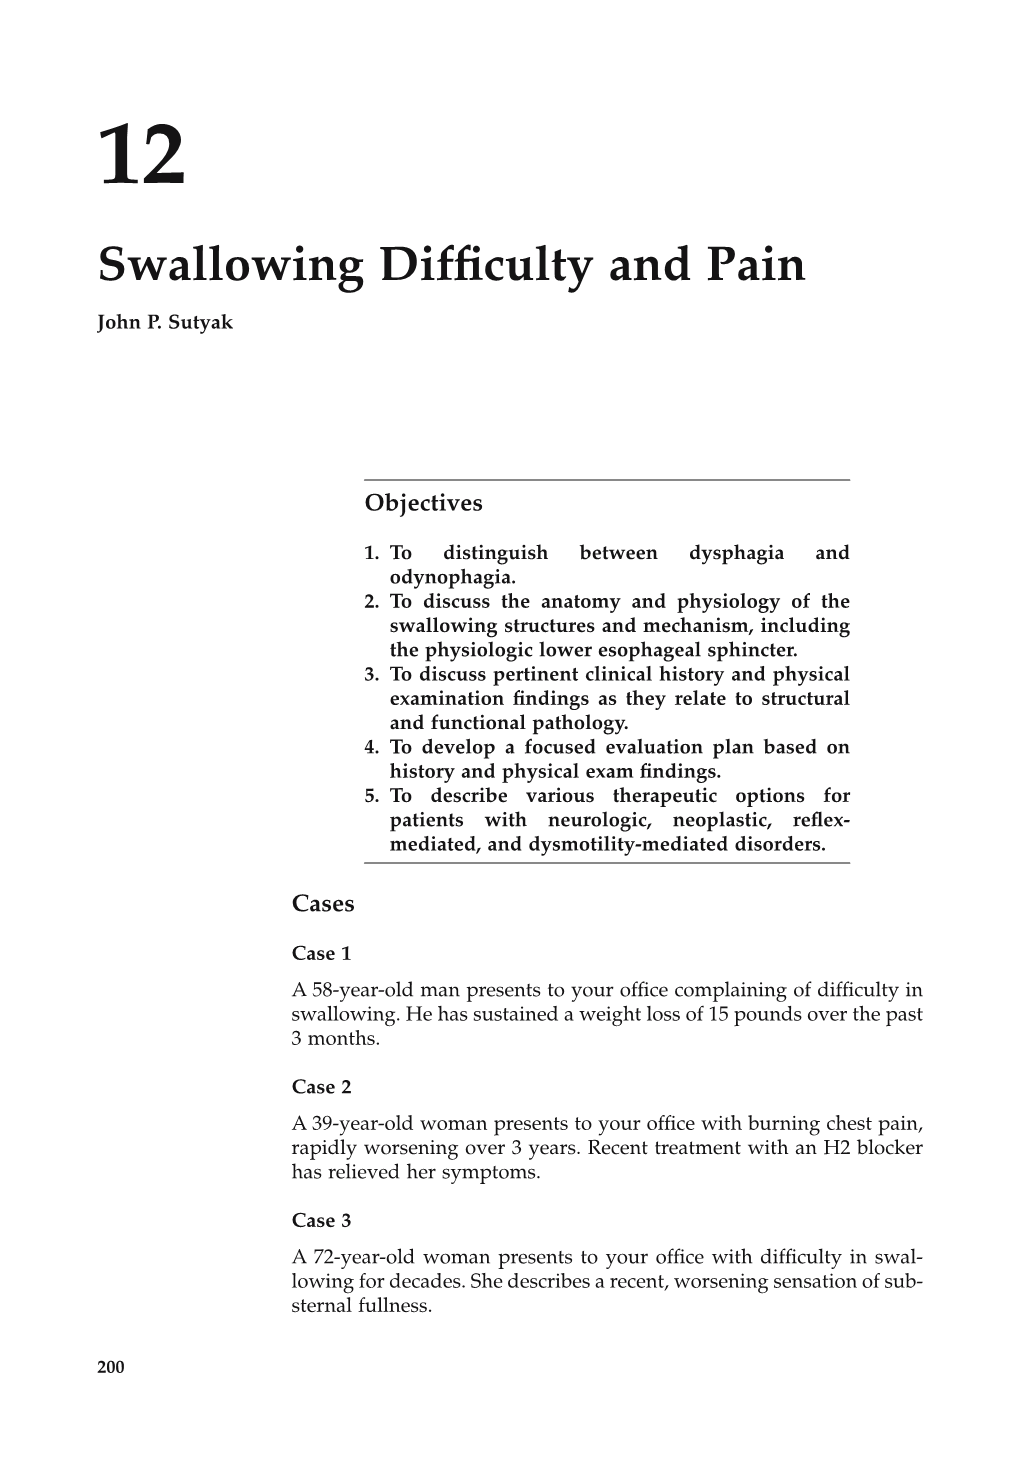 Swallowing Difficulty and Pain